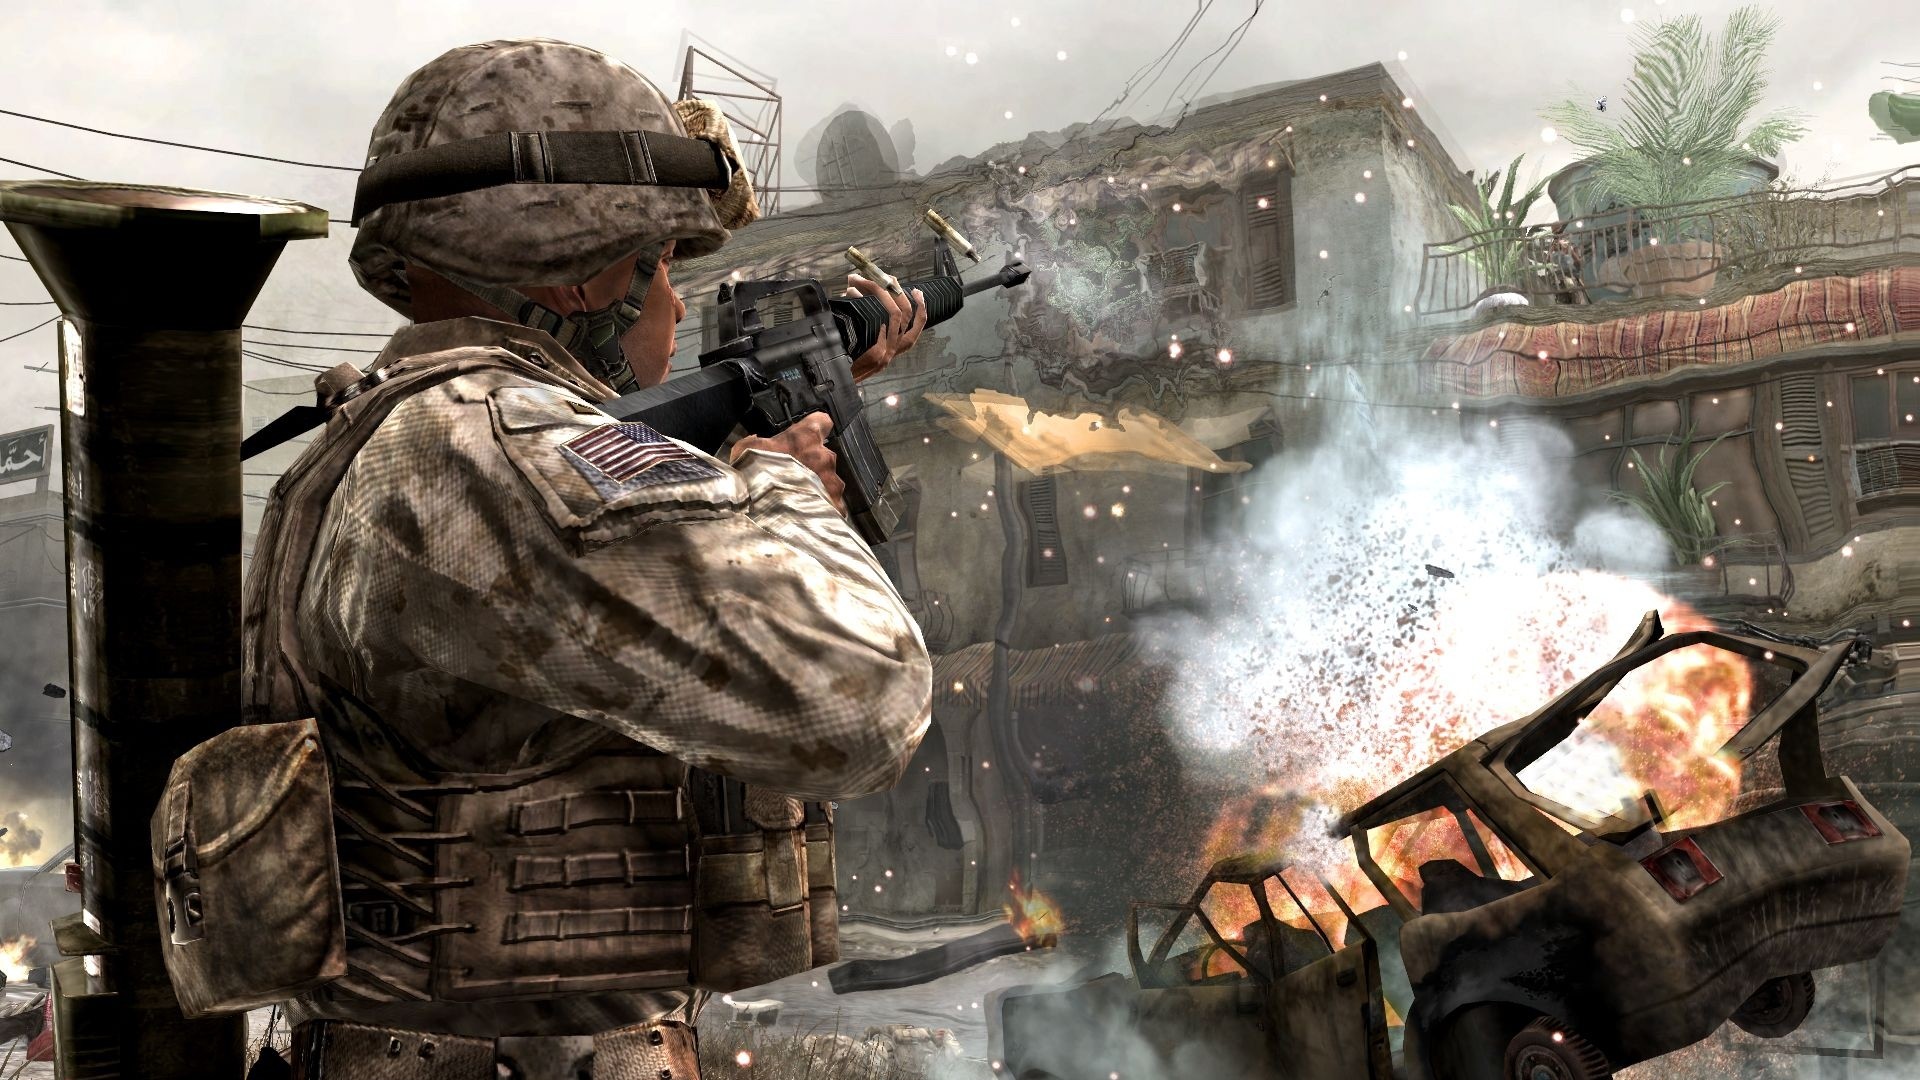 1920x1080 Get the latest call of duty 4 modern warfare, soldiers, machine building  news, pictures and videos and learn all about call of duty 4 modern  warfare, ...